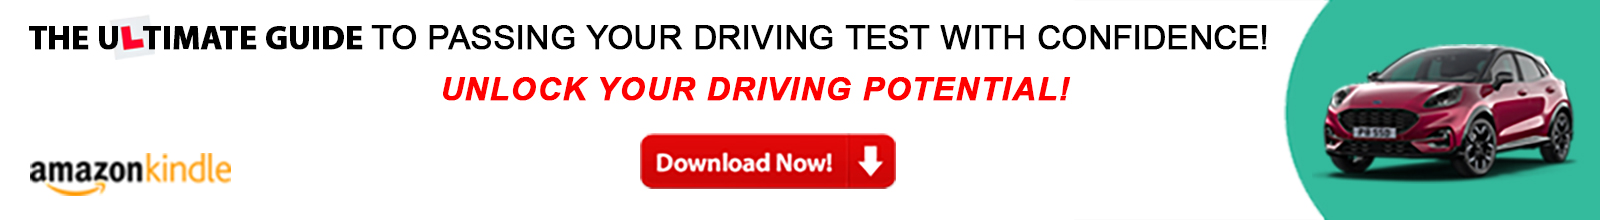 London - Unlock your driving potential with The Ultimate Guide to Passing your Driving Test with Confidence.